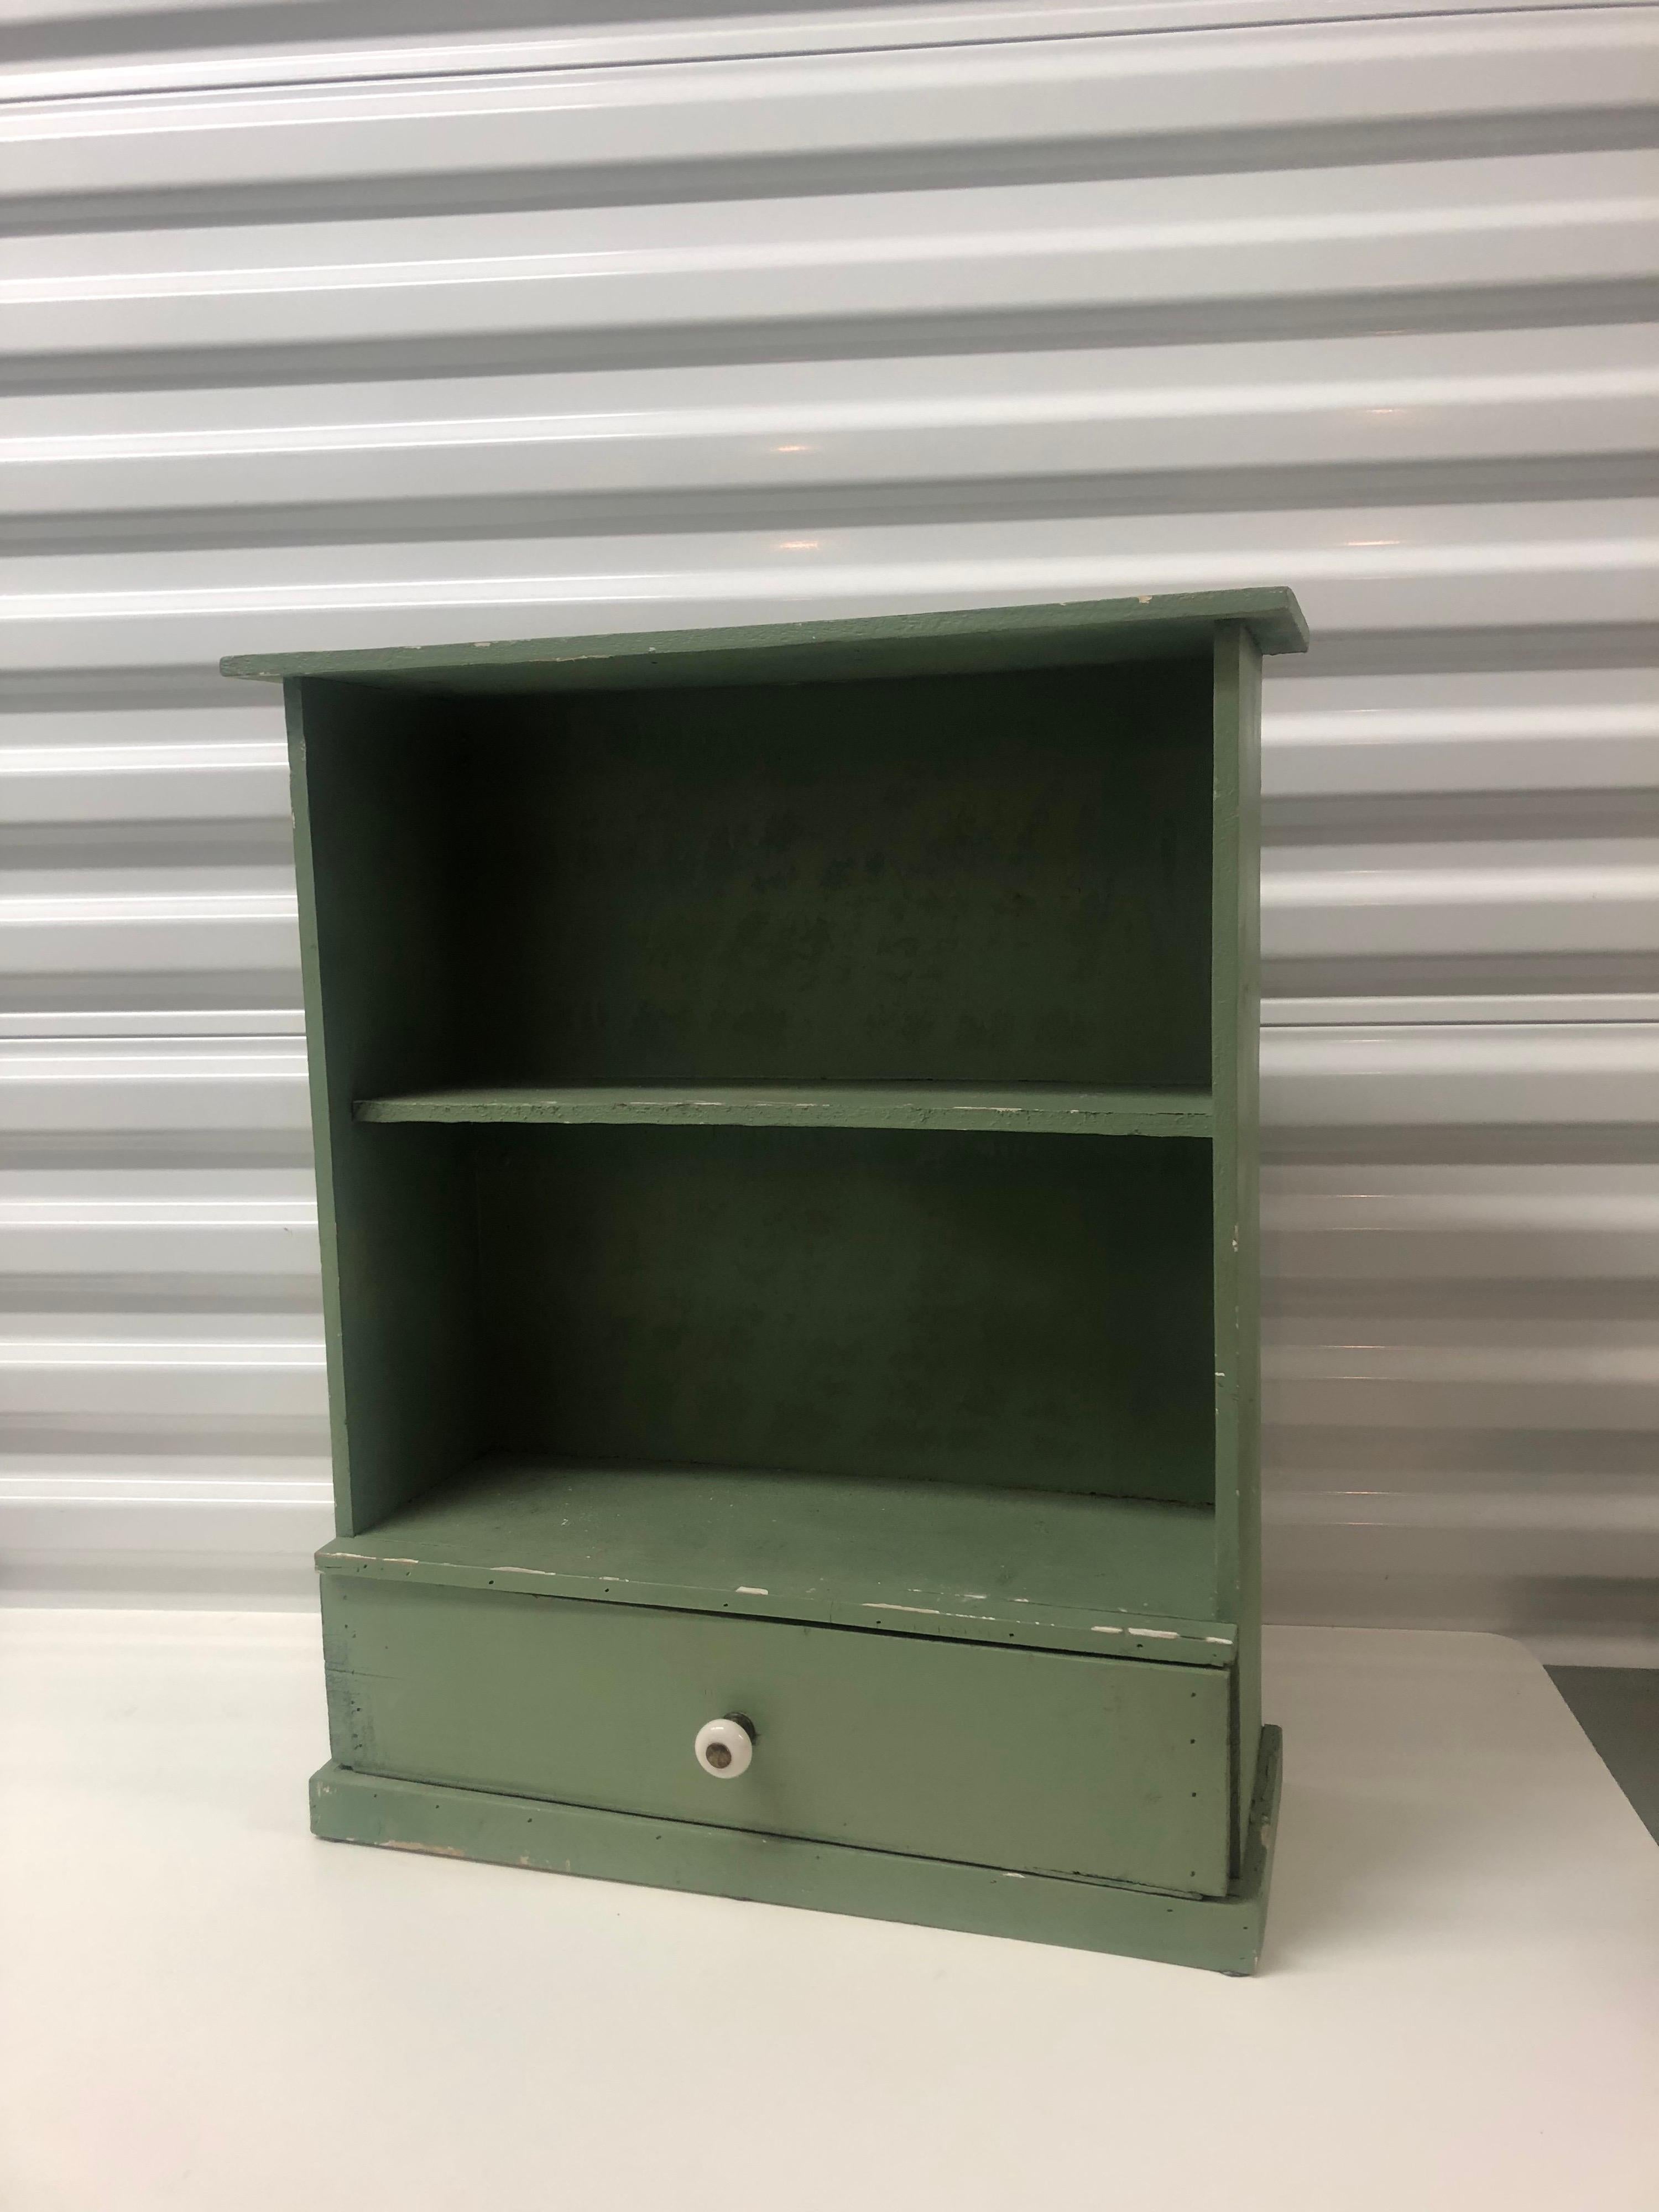 Antique painted green display wall cabinet/shelves.
with small pull out drawer and glass knob.
Chalk paint matte finish.
Size: 16.75